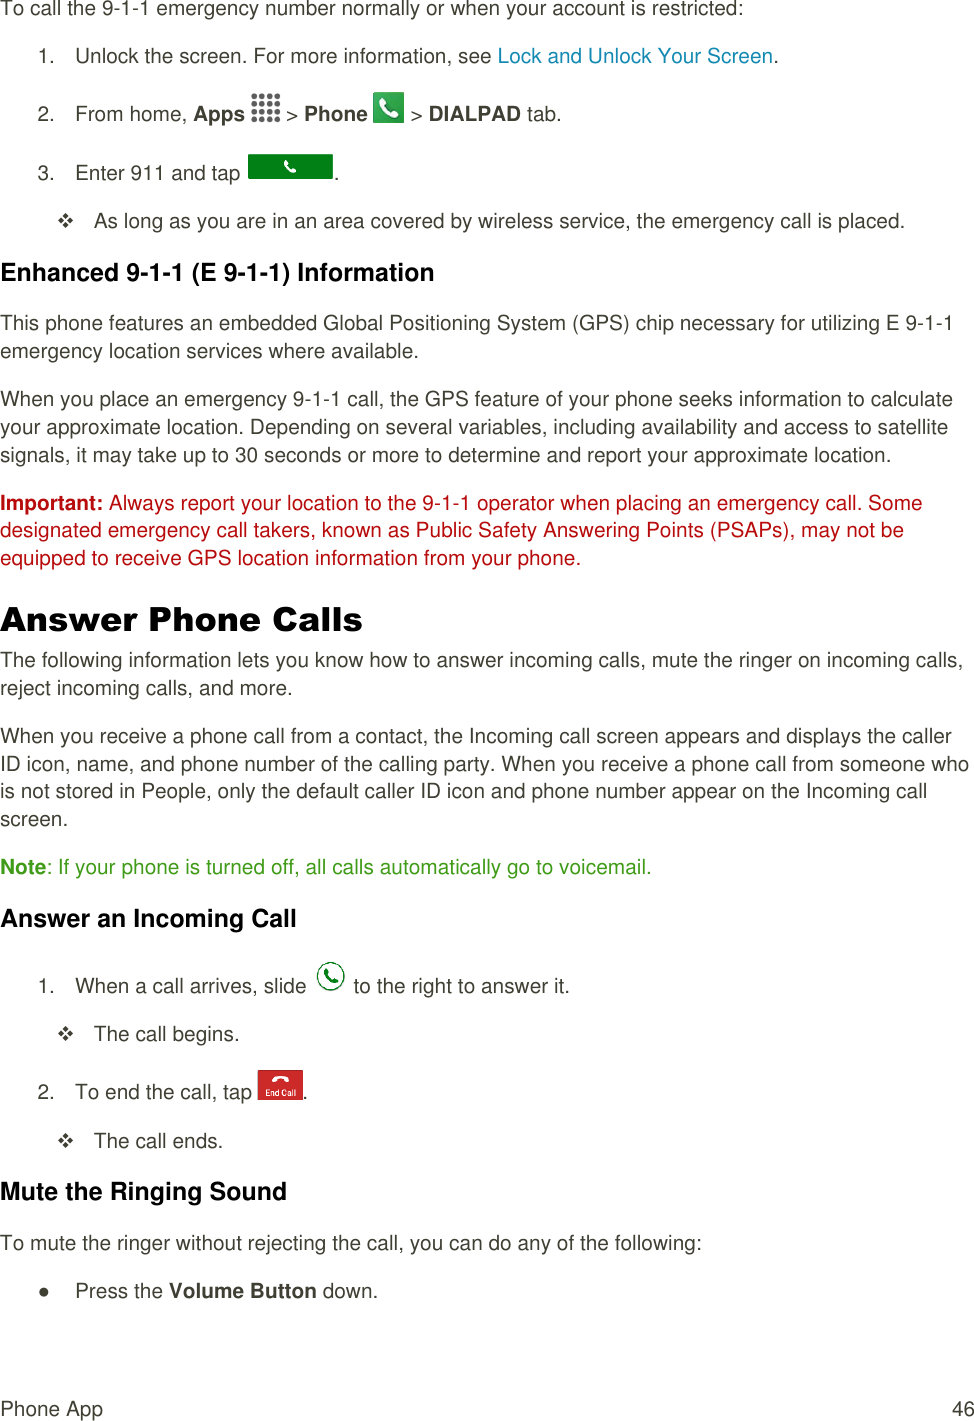 Phone App  46 To call the 9-1-1 emergency number normally or when your account is restricted: 1.  Unlock the screen. For more information, see Lock and Unlock Your Screen. 2.  From home, Apps   &gt; Phone   &gt; DIALPAD tab. 3.  Enter 911 and tap  .   As long as you are in an area covered by wireless service, the emergency call is placed. Enhanced 9-1-1 (E 9-1-1) Information This phone features an embedded Global Positioning System (GPS) chip necessary for utilizing E 9-1-1 emergency location services where available. When you place an emergency 9-1-1 call, the GPS feature of your phone seeks information to calculate your approximate location. Depending on several variables, including availability and access to satellite signals, it may take up to 30 seconds or more to determine and report your approximate location. Important: Always report your location to the 9-1-1 operator when placing an emergency call. Some designated emergency call takers, known as Public Safety Answering Points (PSAPs), may not be equipped to receive GPS location information from your phone. Answer Phone Calls The following information lets you know how to answer incoming calls, mute the ringer on incoming calls, reject incoming calls, and more. When you receive a phone call from a contact, the Incoming call screen appears and displays the caller ID icon, name, and phone number of the calling party. When you receive a phone call from someone who is not stored in People, only the default caller ID icon and phone number appear on the Incoming call screen. Note: If your phone is turned off, all calls automatically go to voicemail. Answer an Incoming Call 1.  When a call arrives, slide   to the right to answer it.    The call begins. 2.  To end the call, tap  .    The call ends. Mute the Ringing Sound To mute the ringer without rejecting the call, you can do any of the following: ●  Press the Volume Button down. 